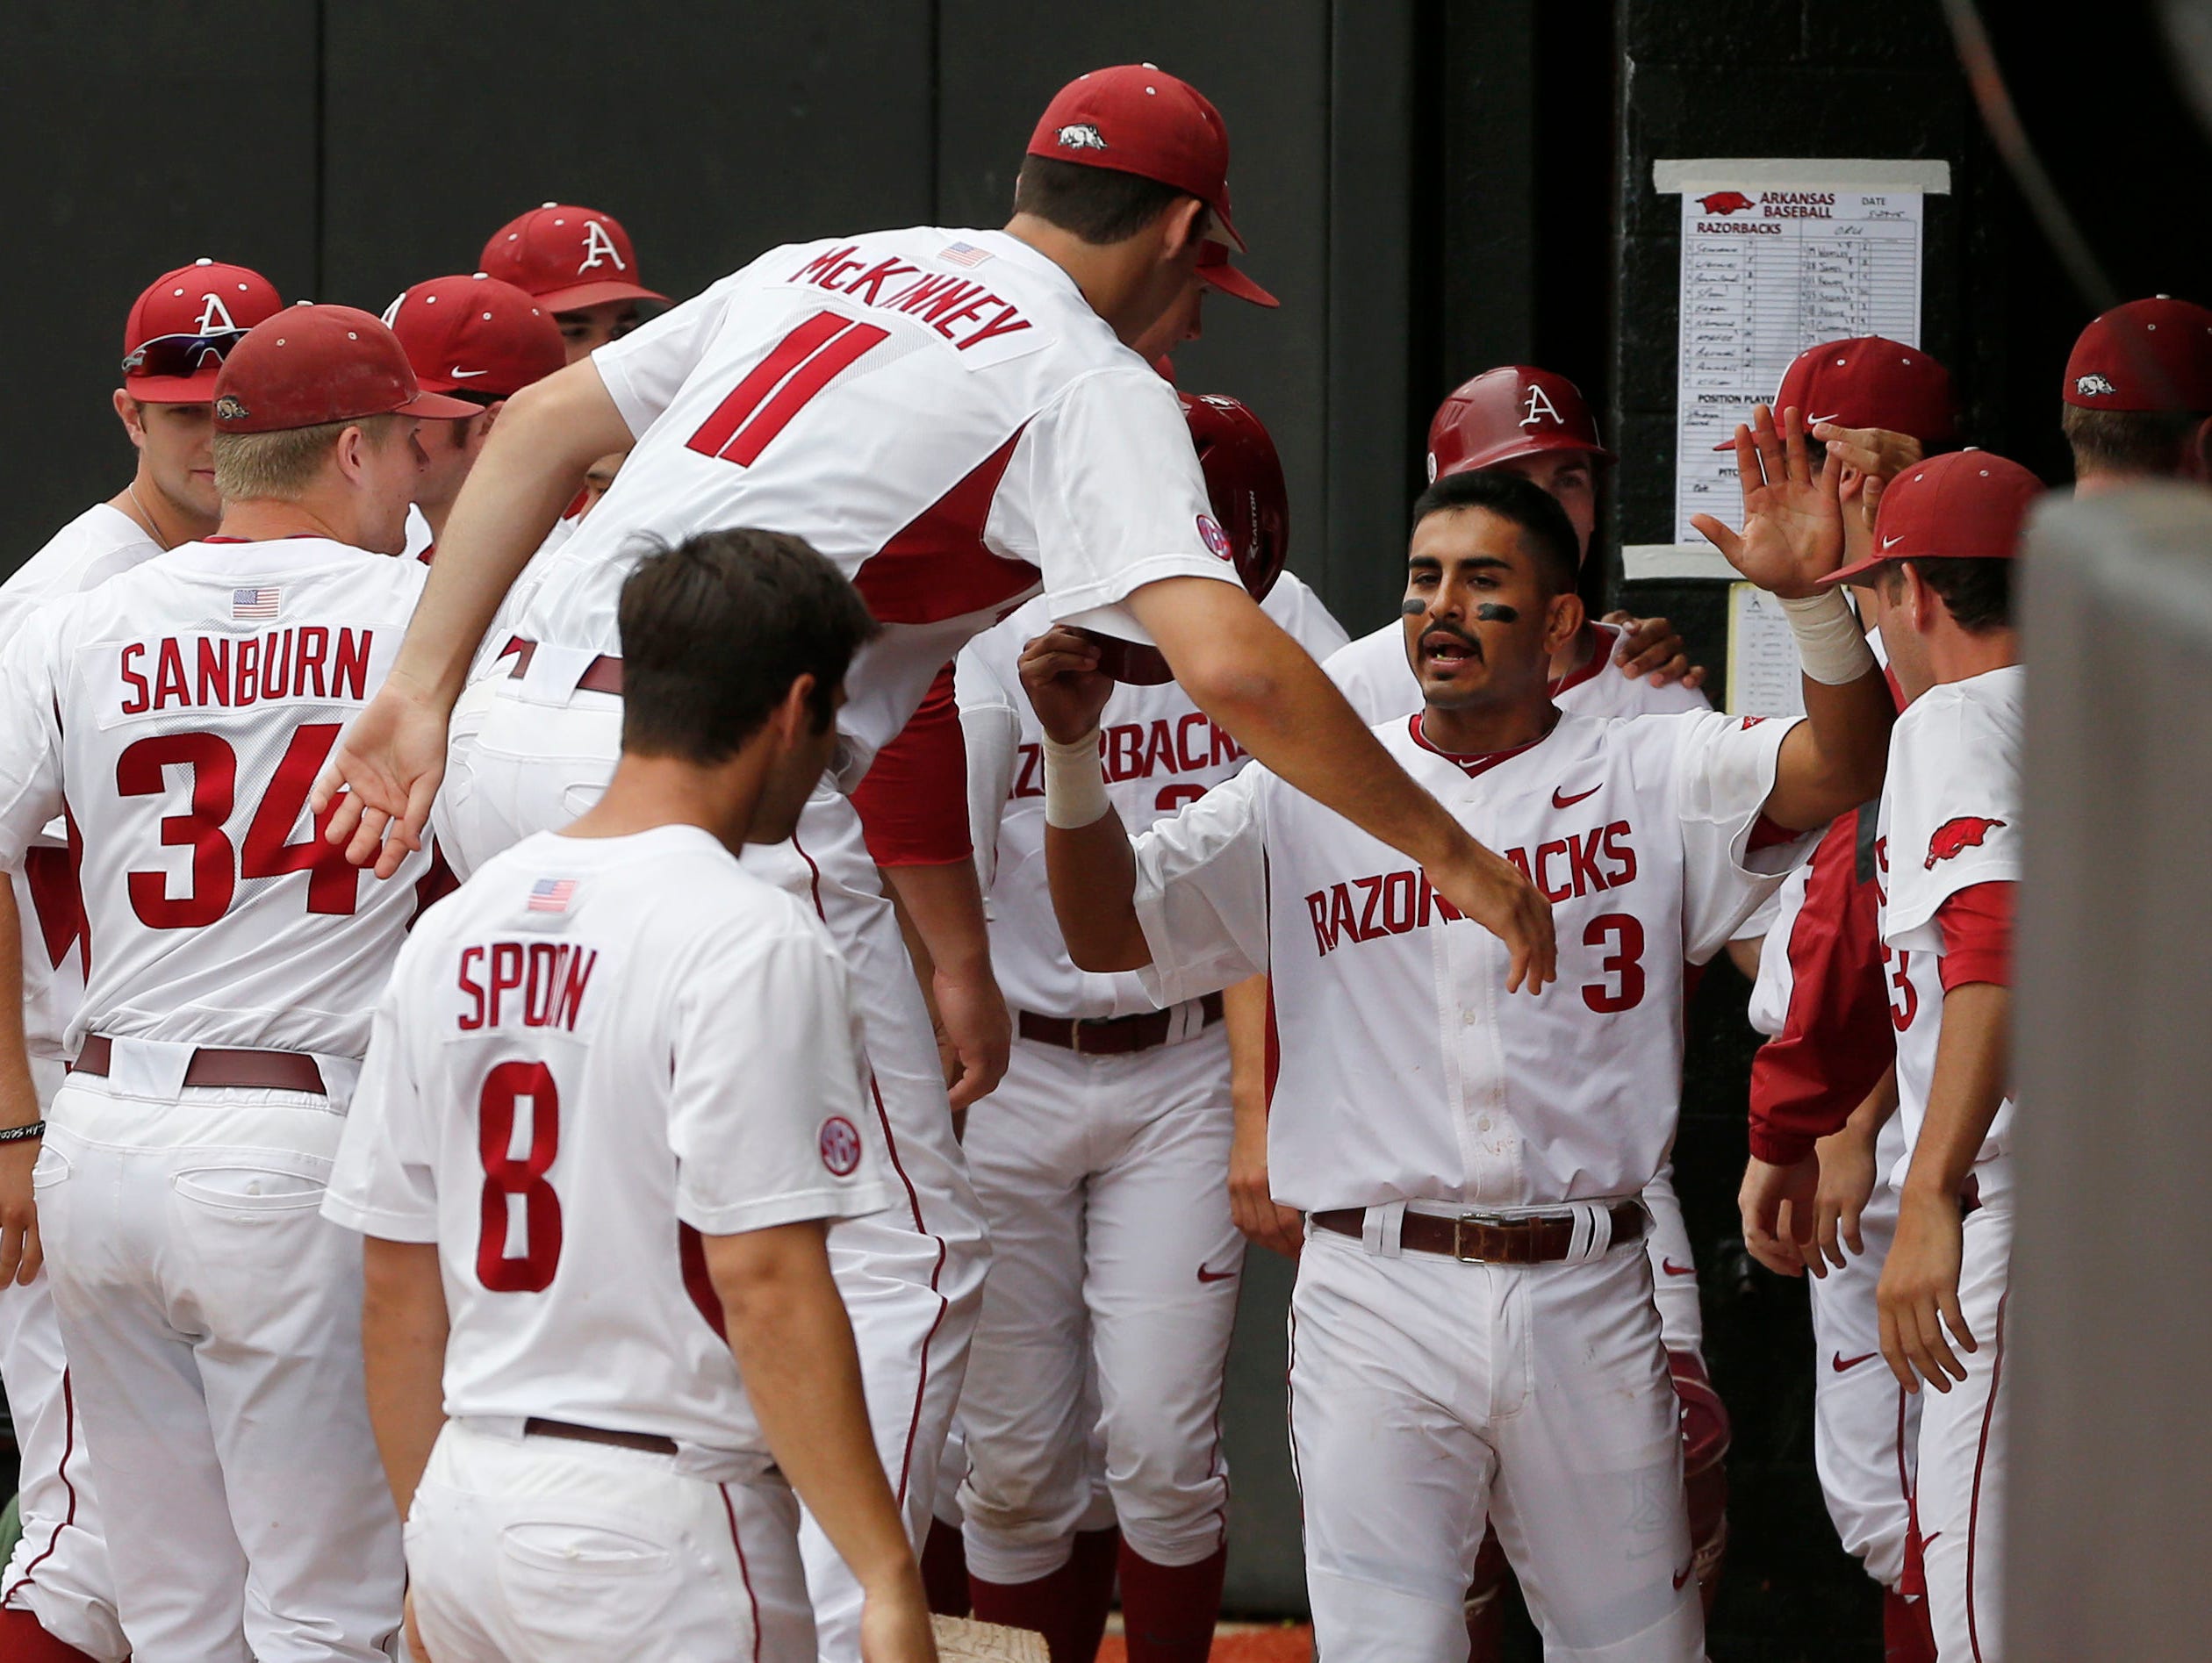 Arkansas’ Keaton McKinney (11) and Tyler Spoon (8) congratulate Michael Bernal, right, in the dugout after Bernal scored on a single by Tucker Pennell in the third inning of Friday’s regional game against Oral Roberts.